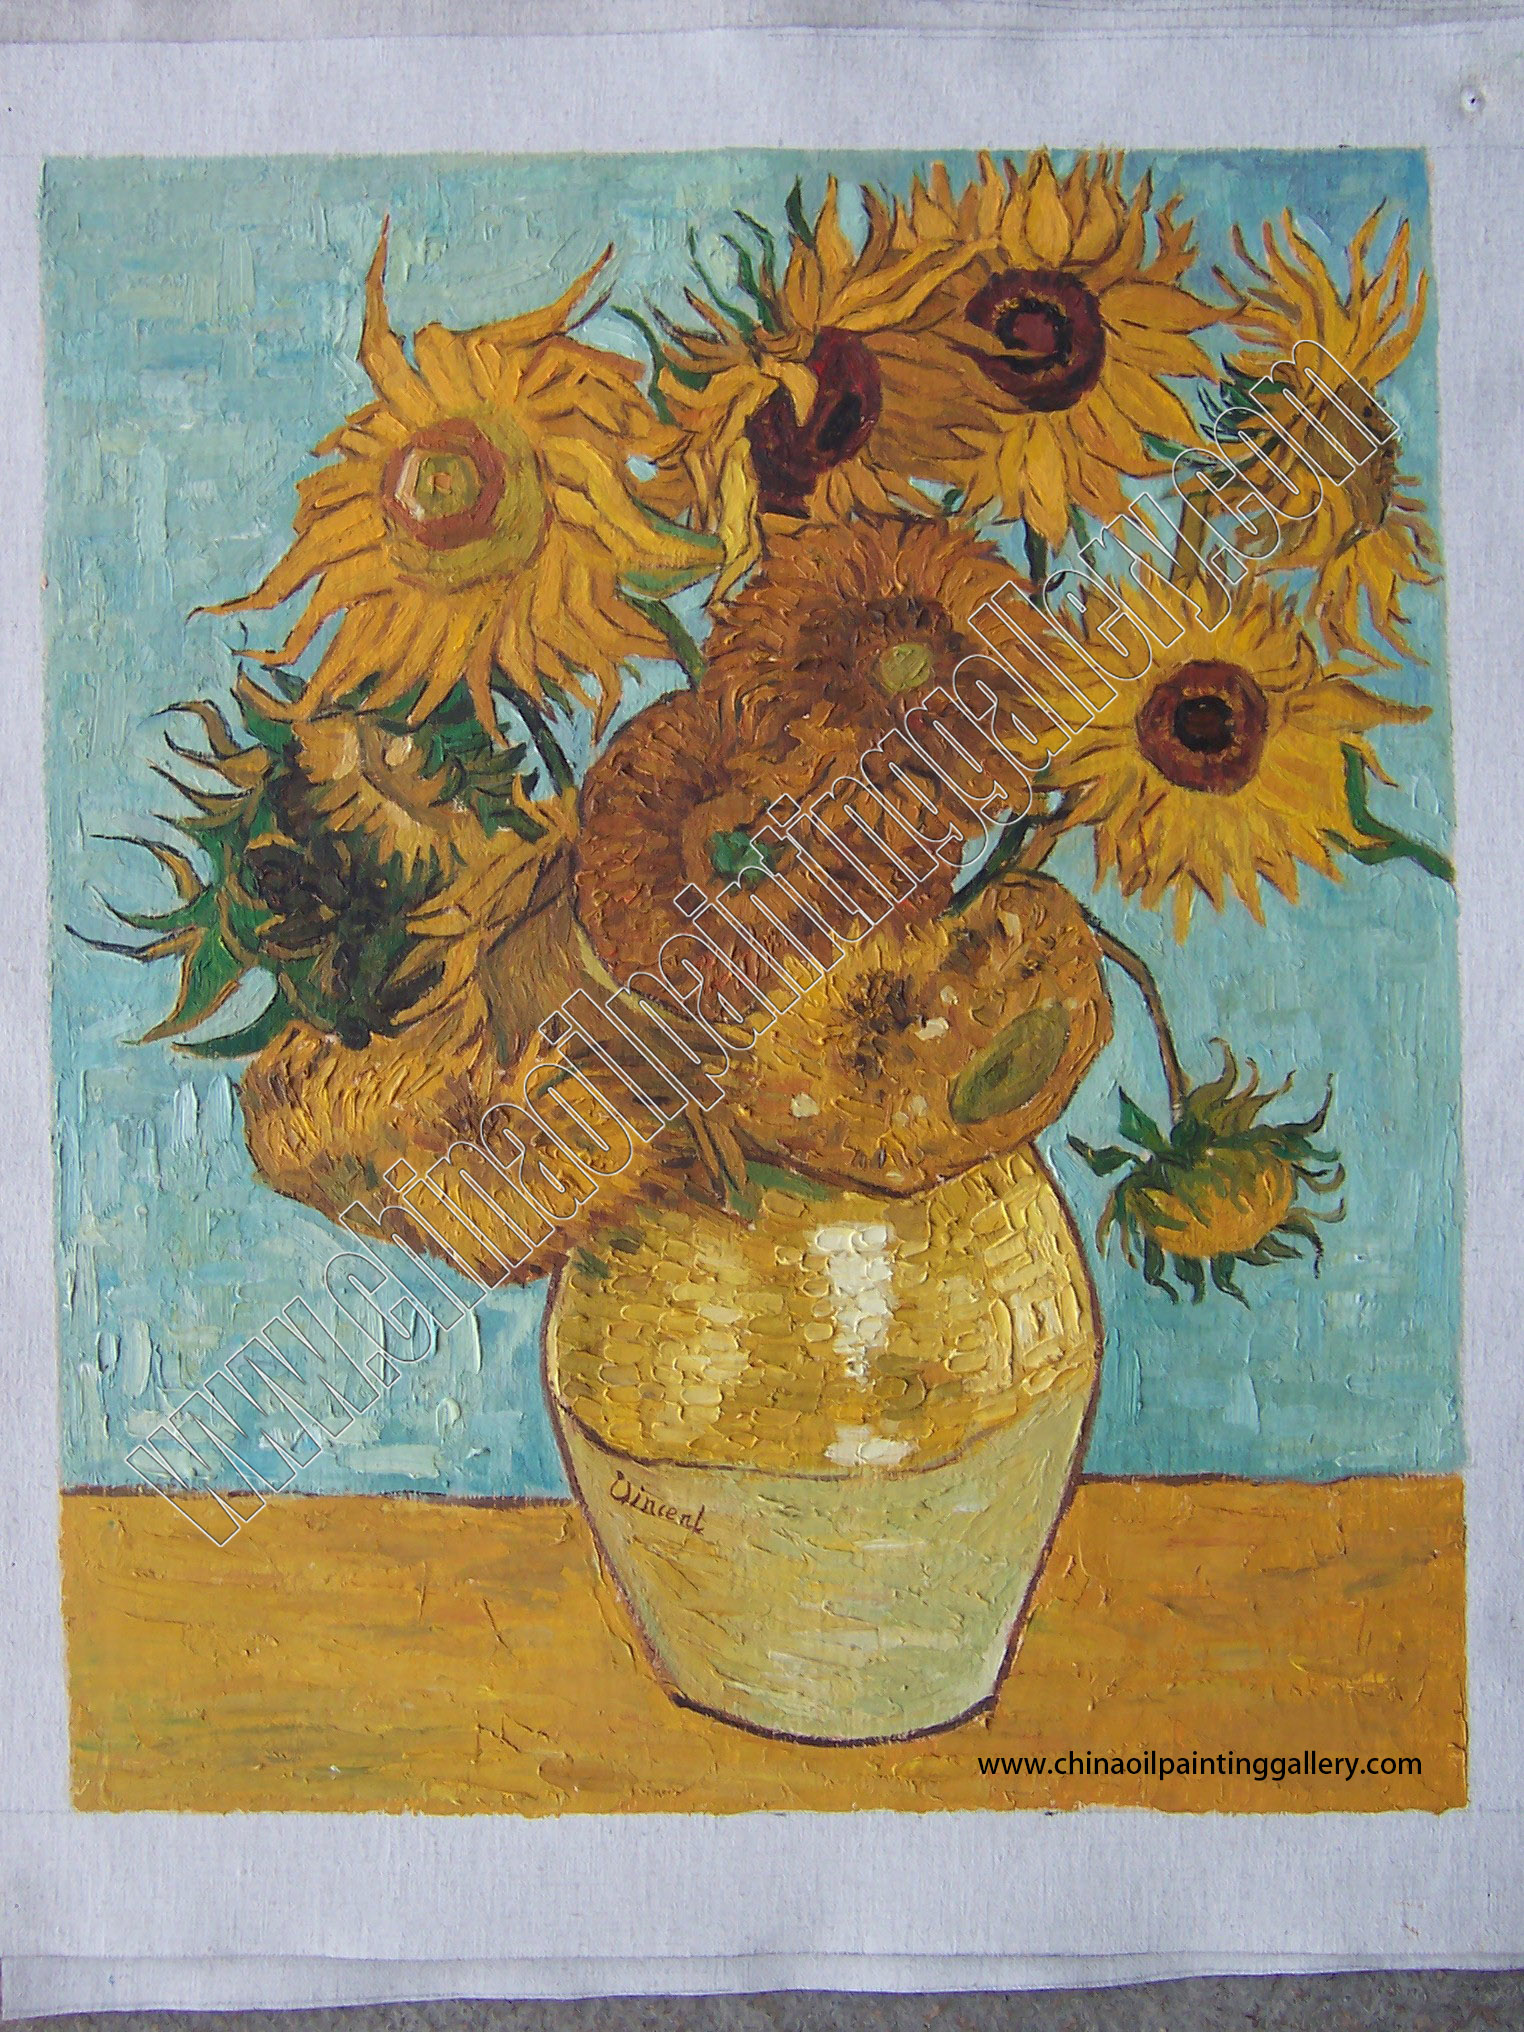 Vincent van Gogh Sunflowers - Oil painting reproductions 17